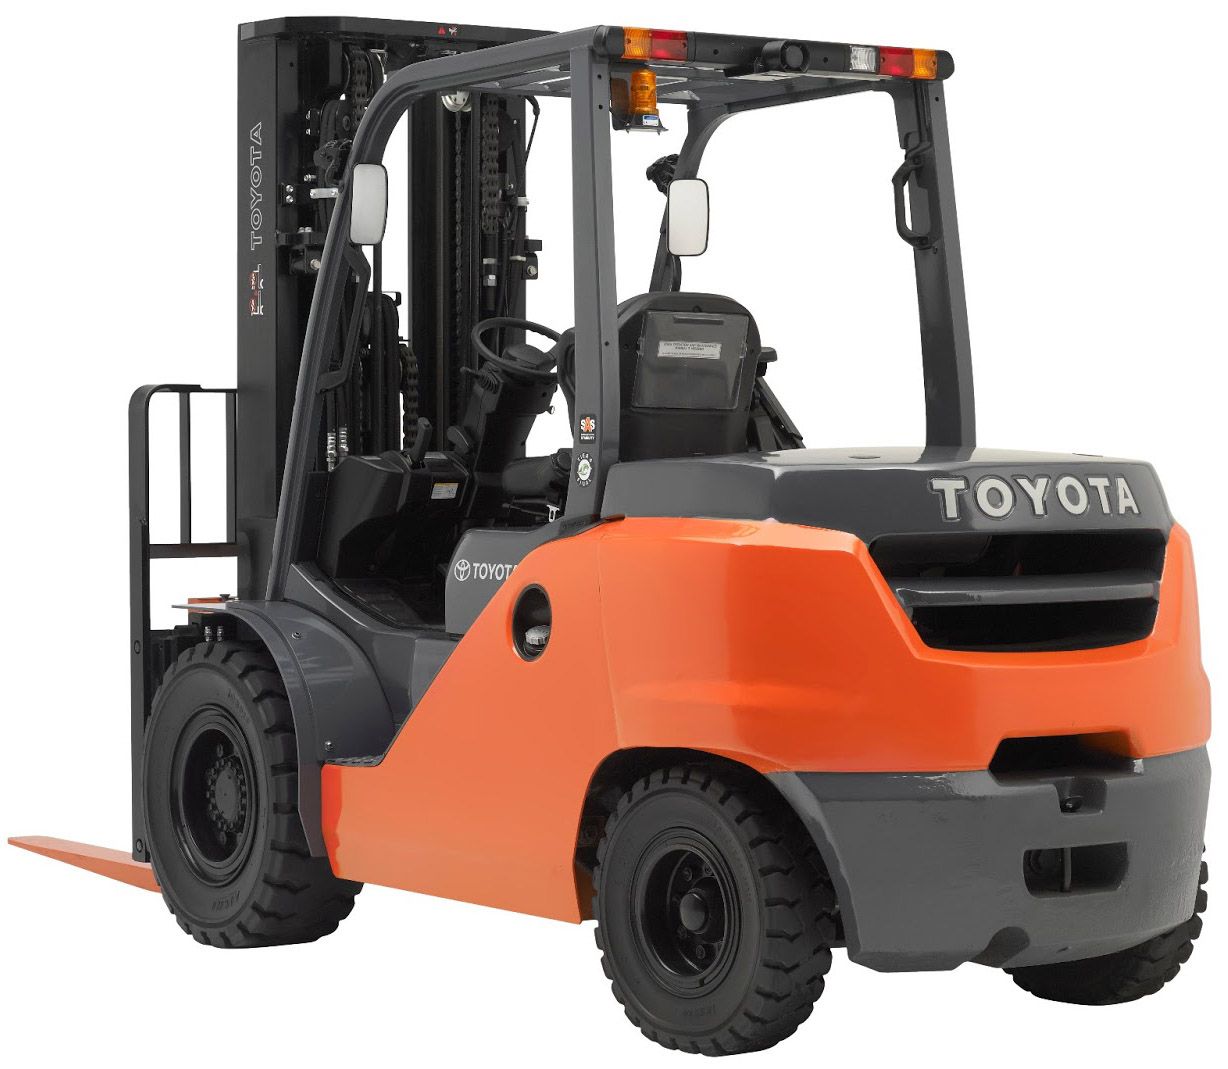 Toyota, Sprint Team Up to Create Wireless Forklift Networks